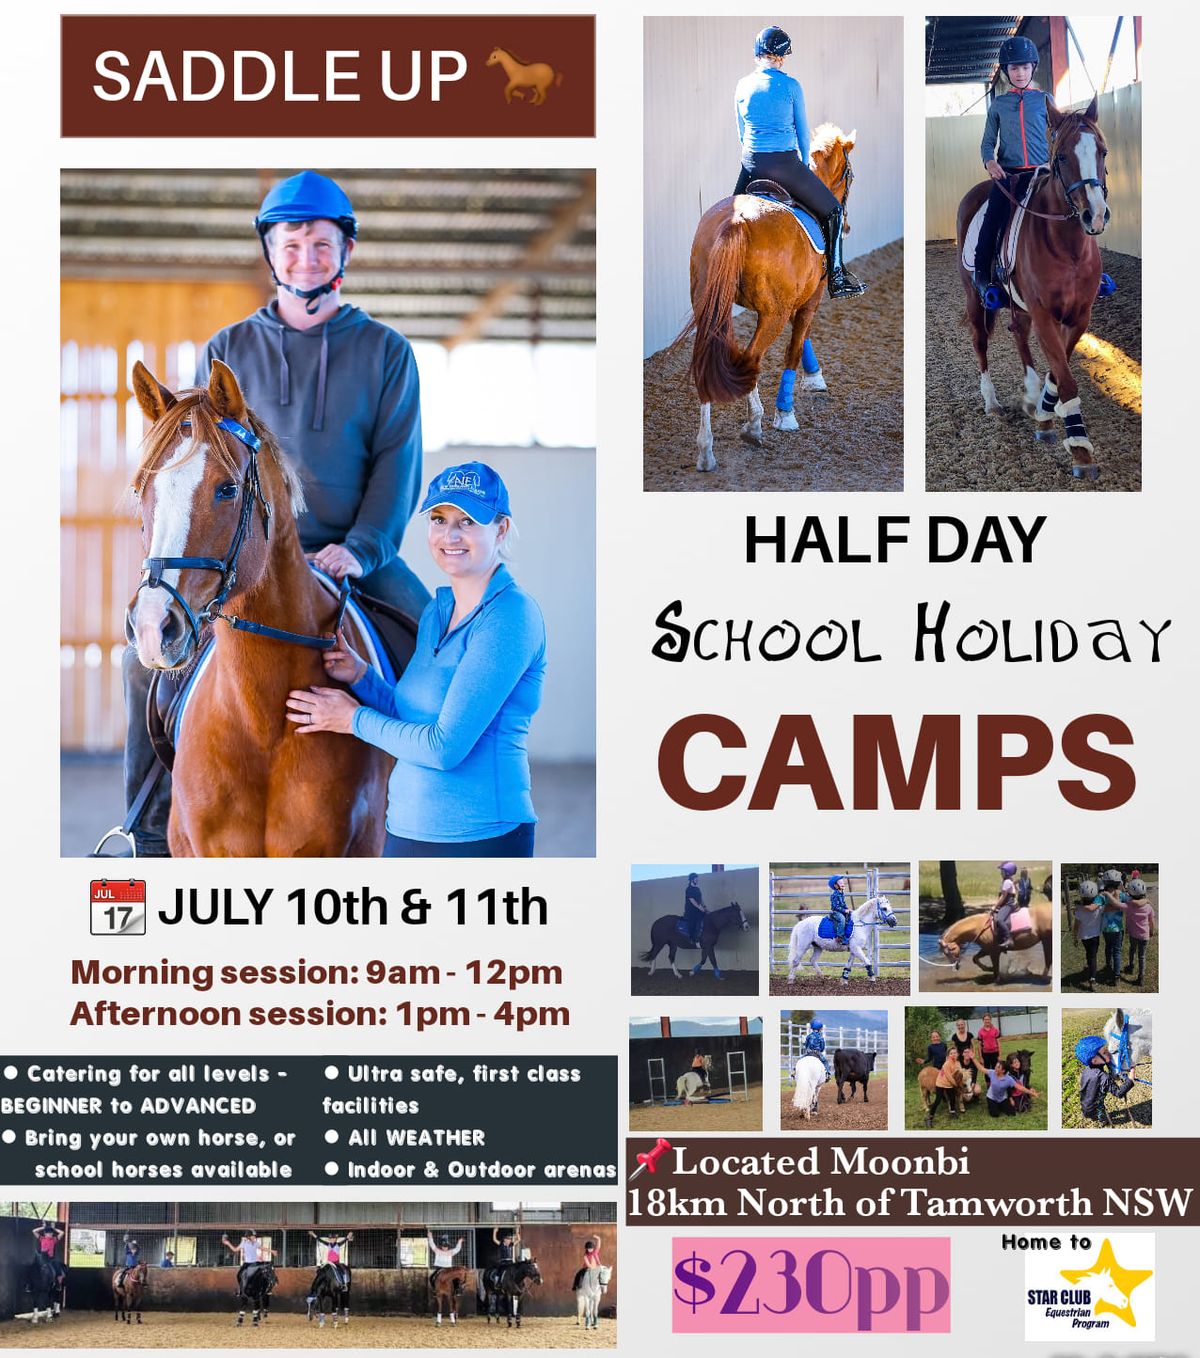 Half Day School Holiday Camps